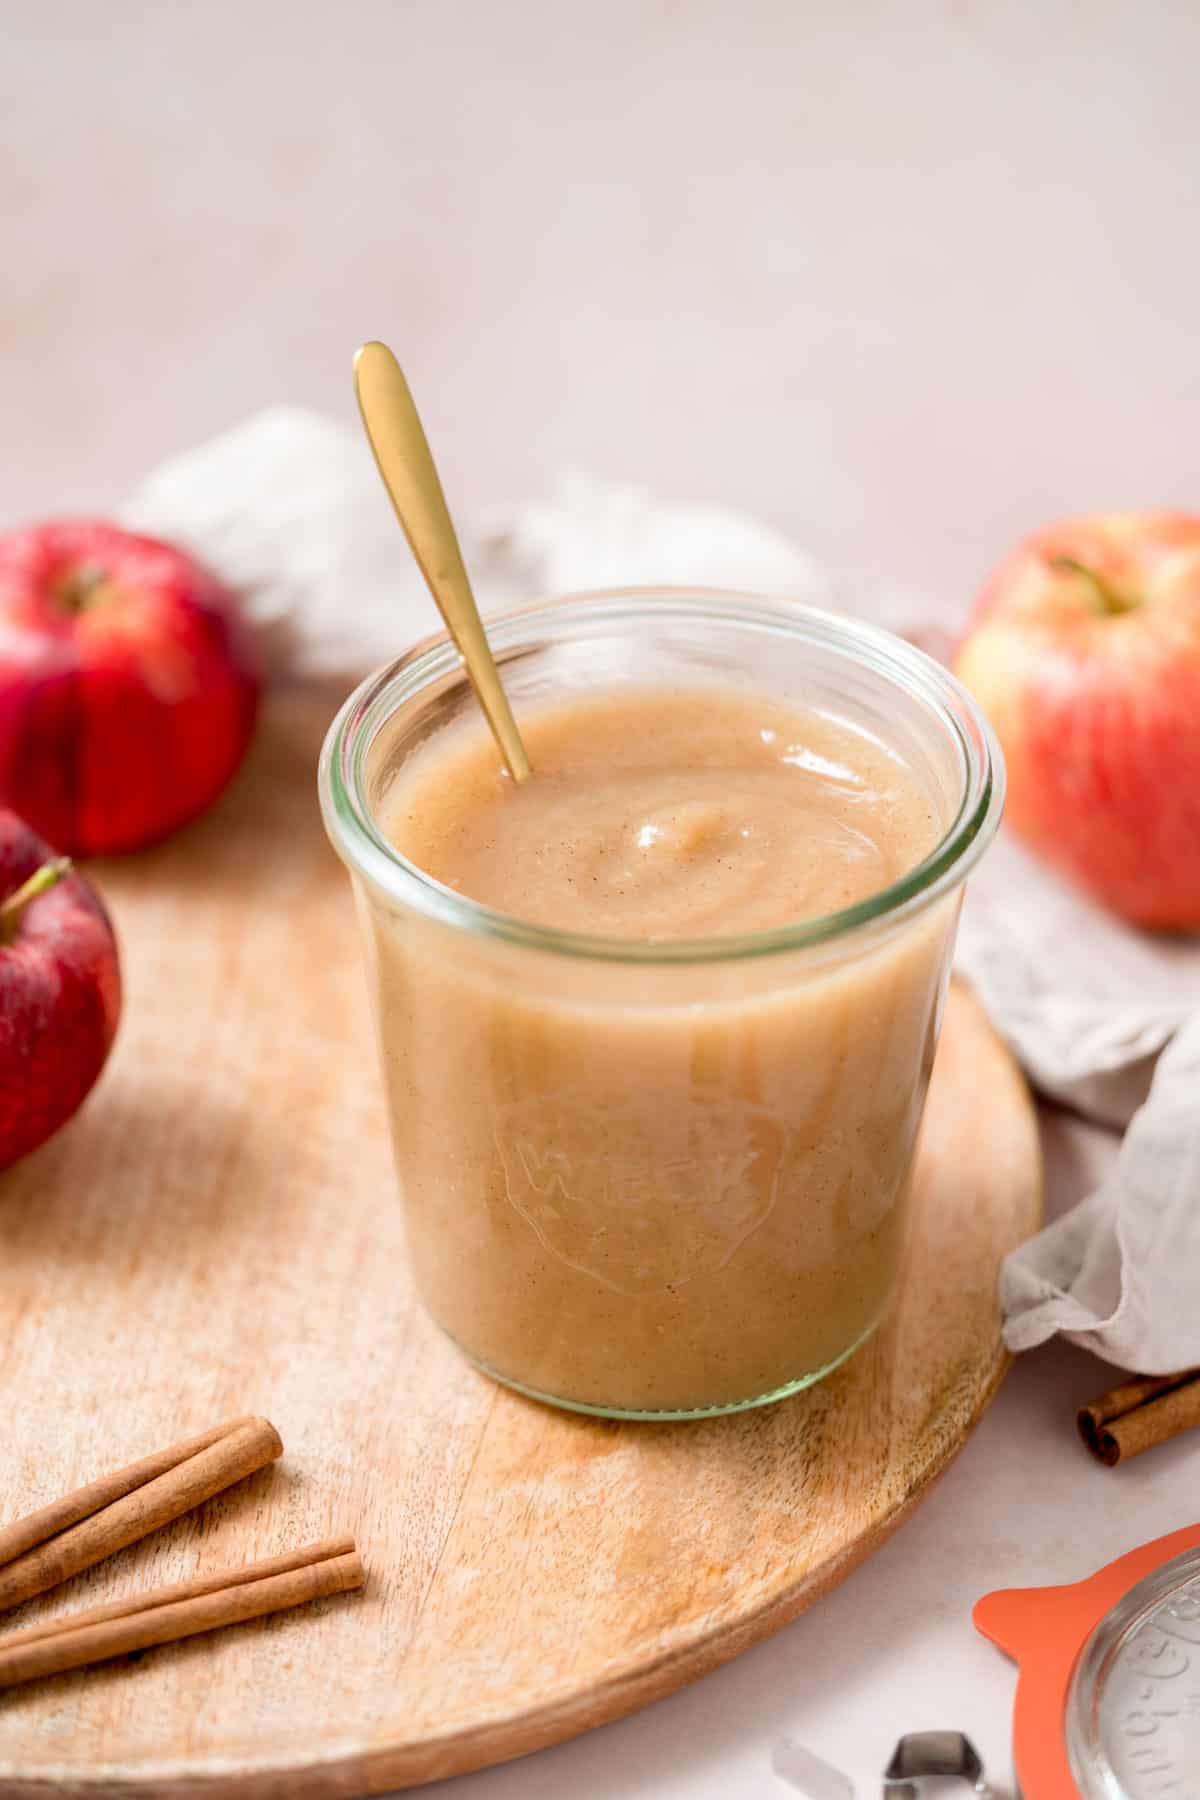 A jar of unsweetened applesauce with a spoon inside surrounded by apples.